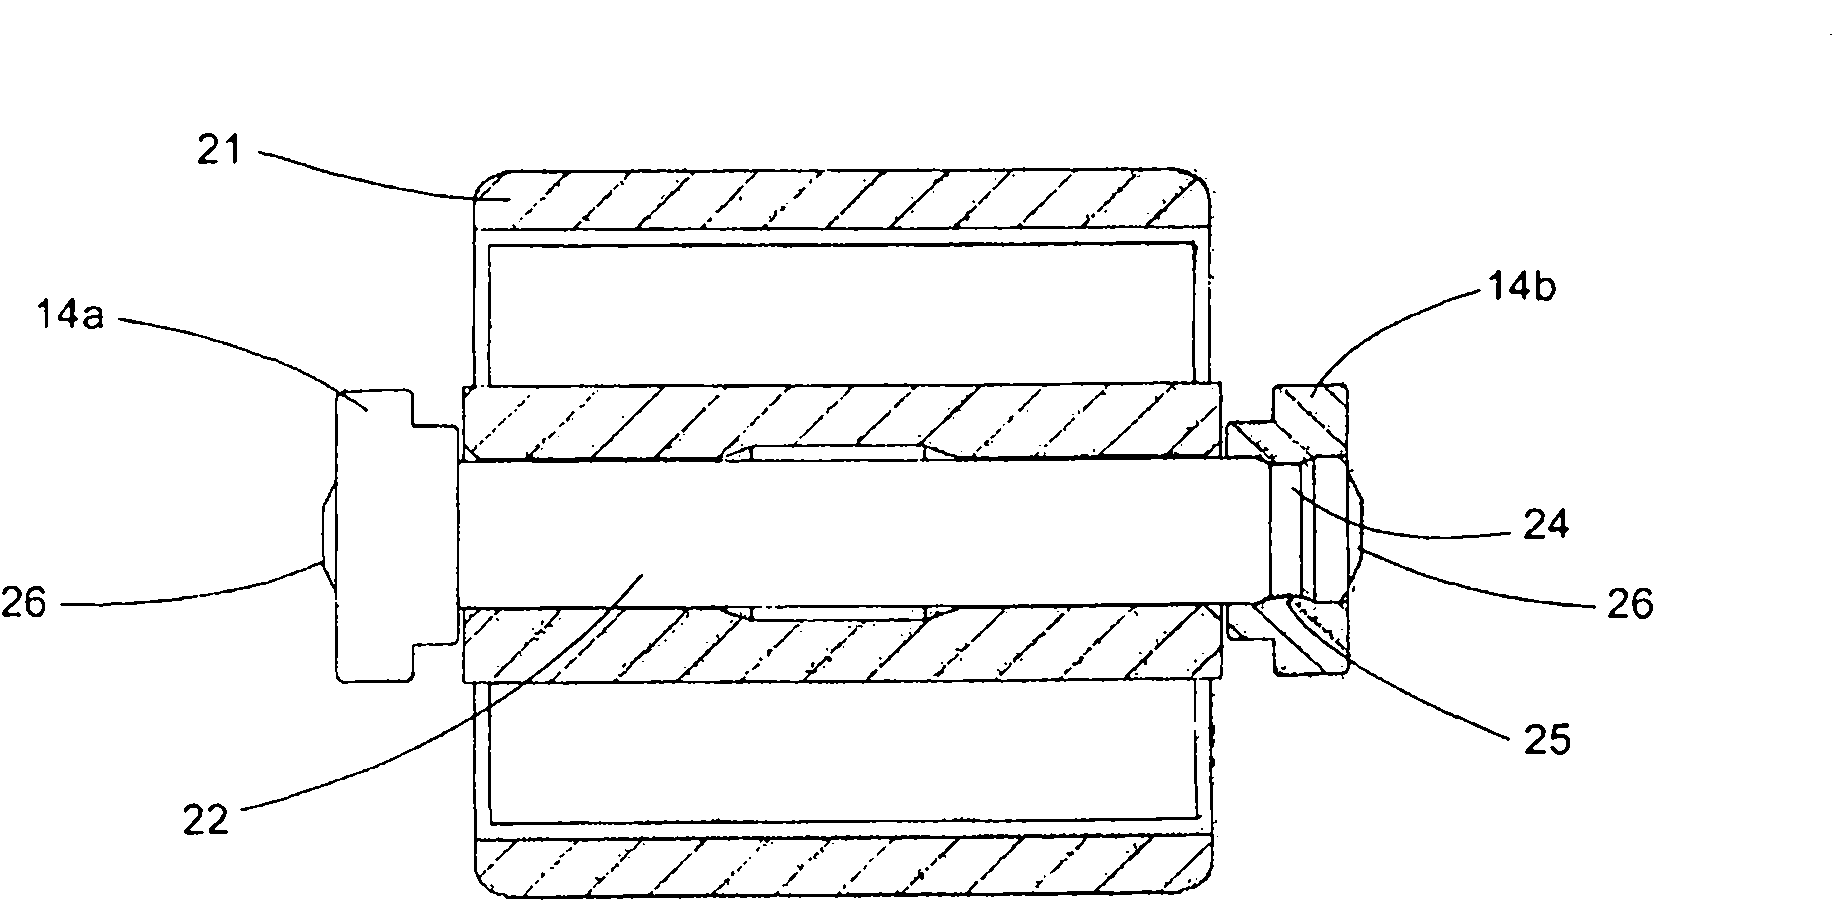 Modularized roll surface for moving article